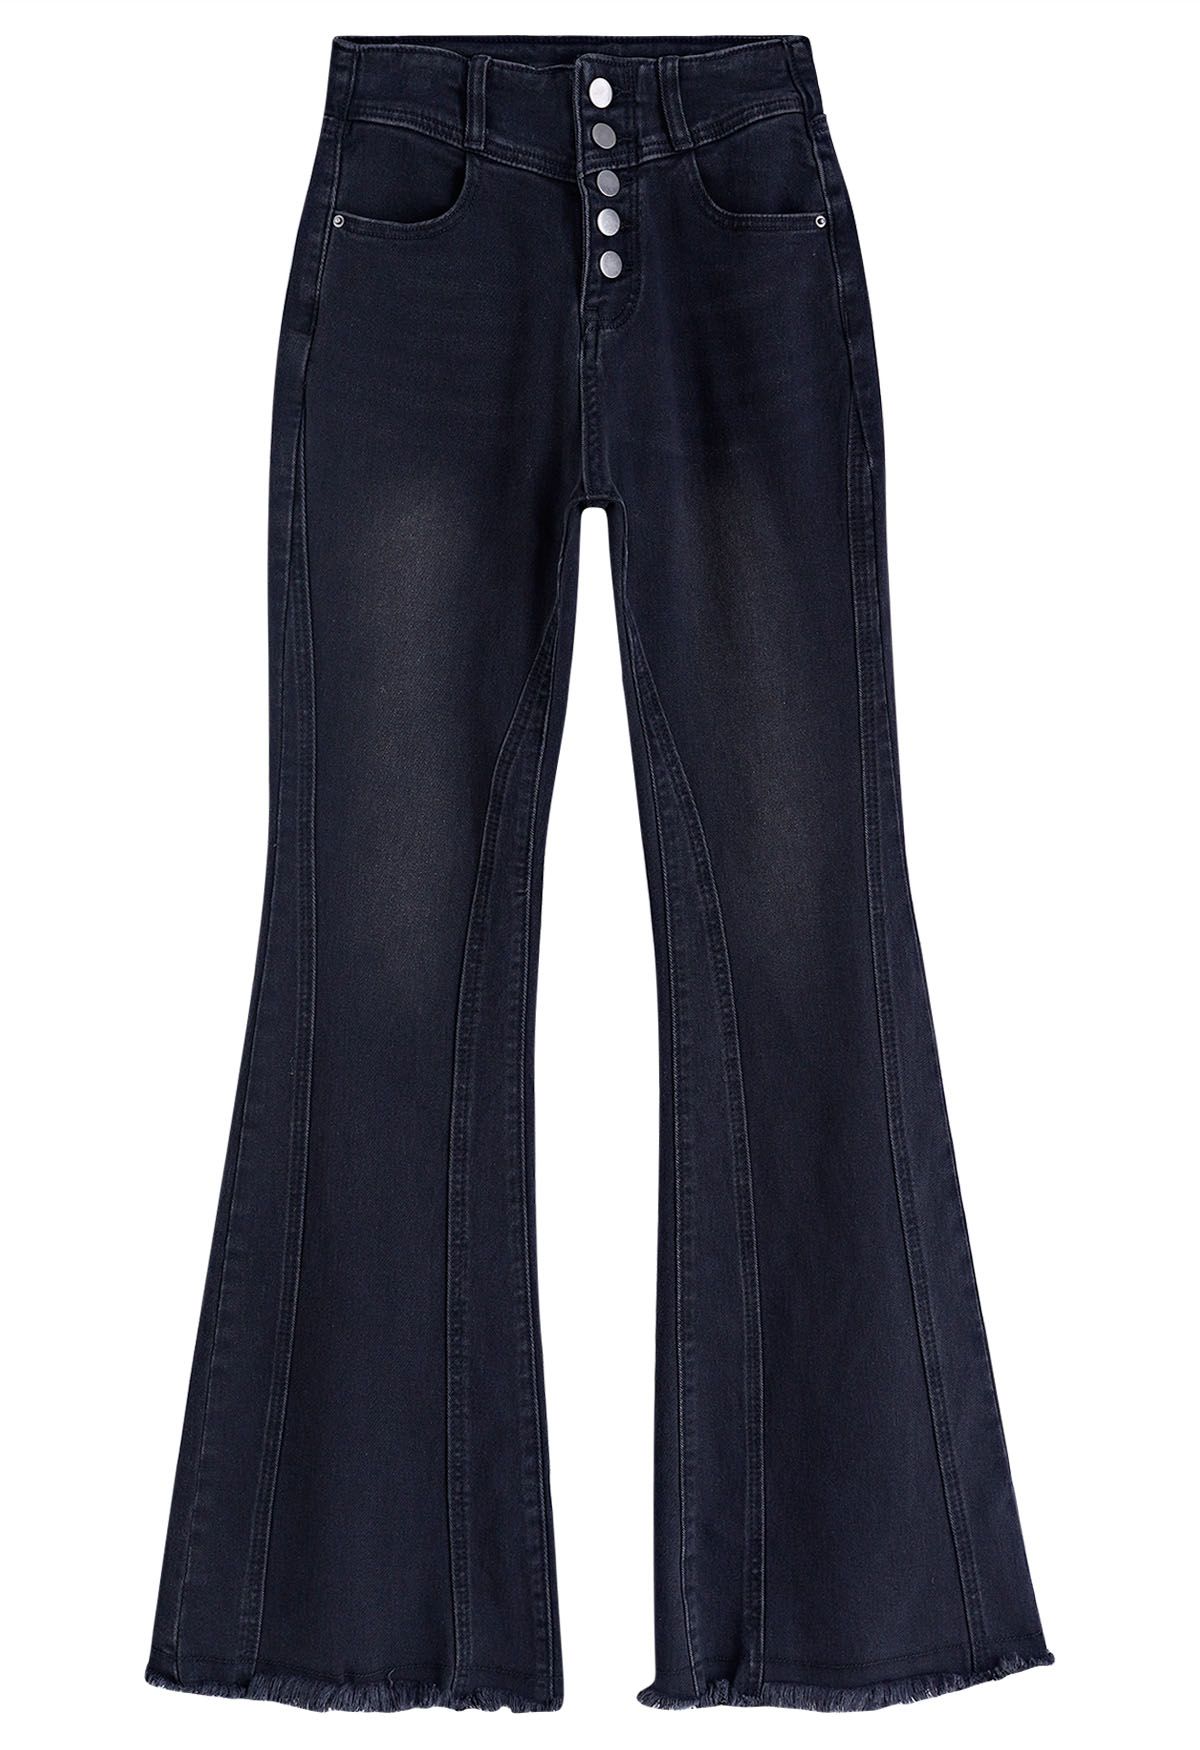 Pockets High-Waisted Wide-Leg Jeans in Black - Retro, Indie and